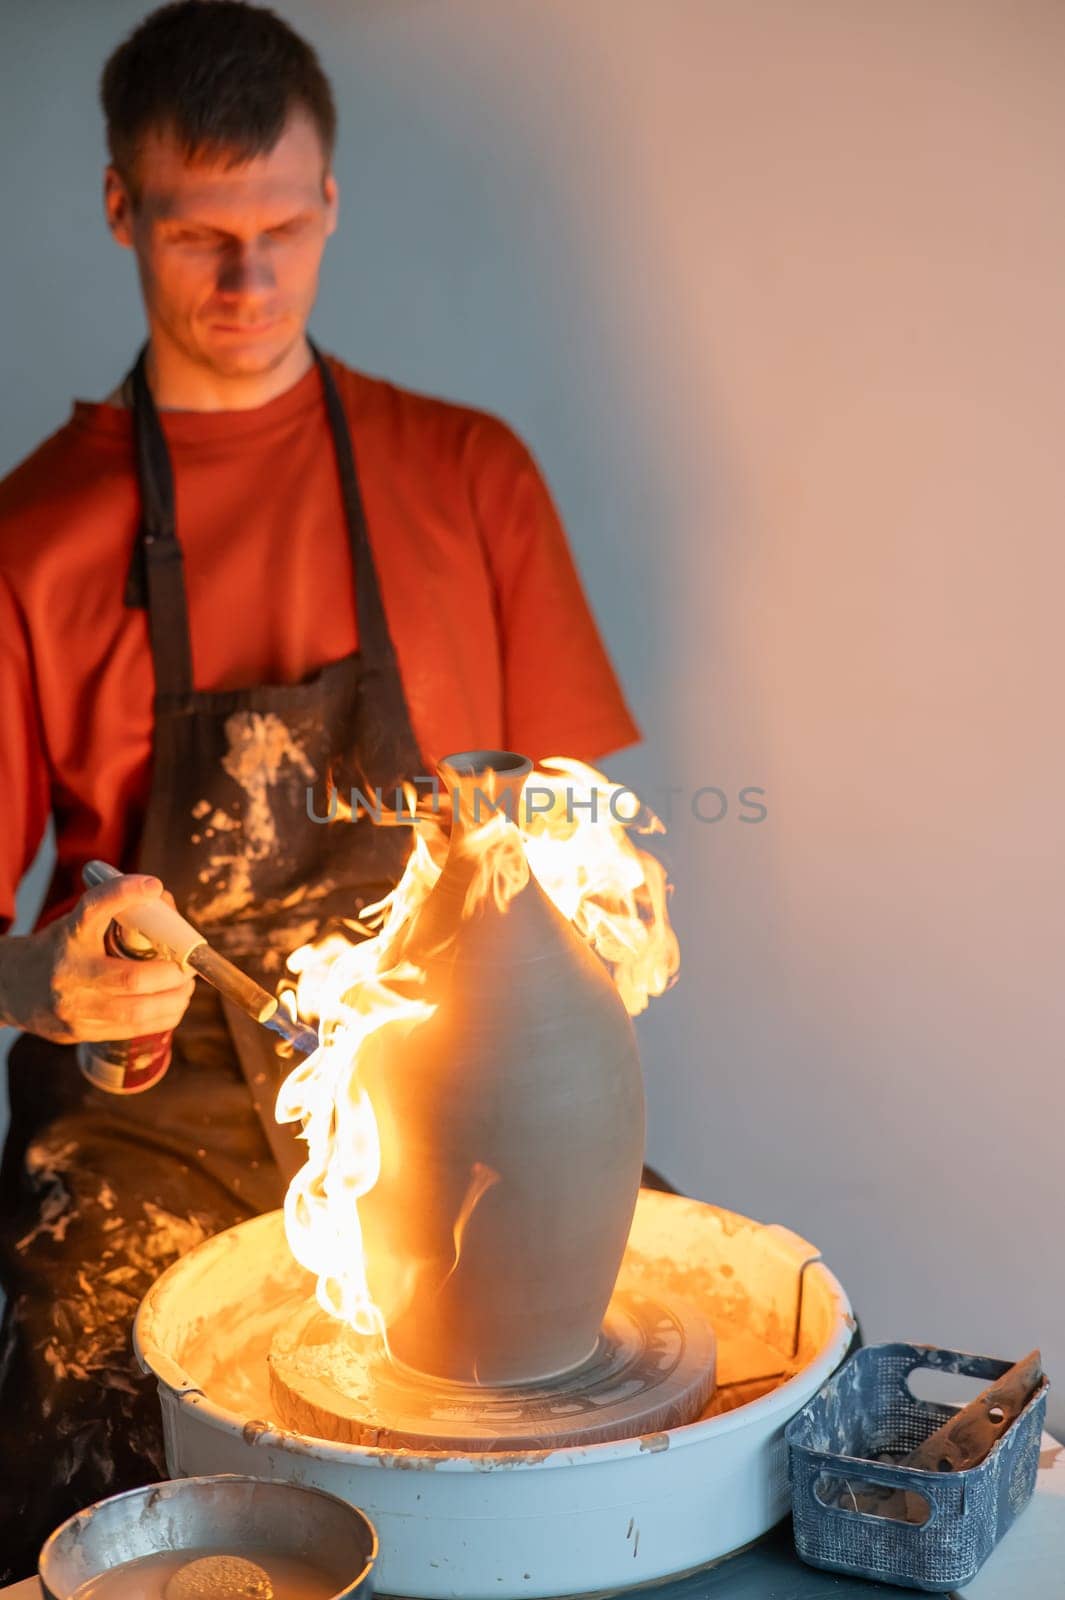 A potter burns a jug with a gas burner on a potter's wheel. Vertical photo